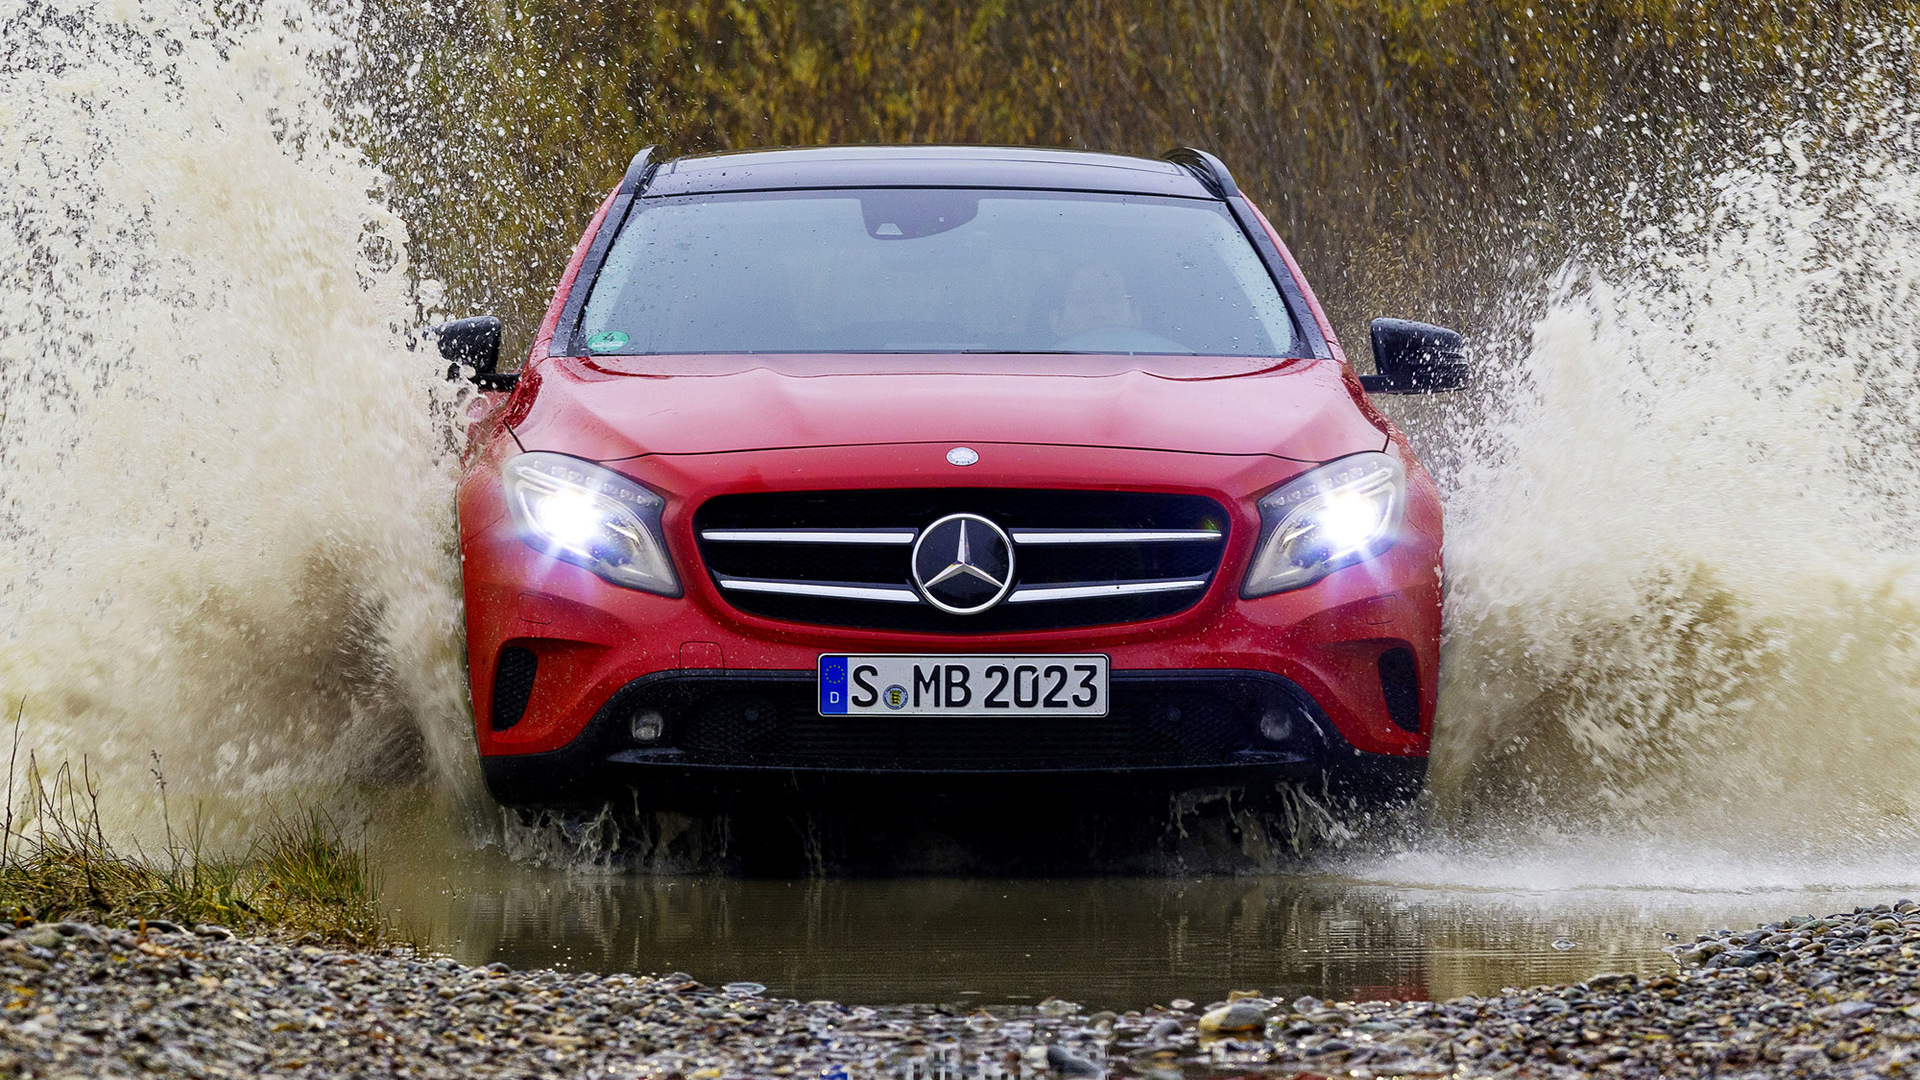 Mercedes-Benz GLA 250 4Matic Urban (2014) Wallpapers and HD Images